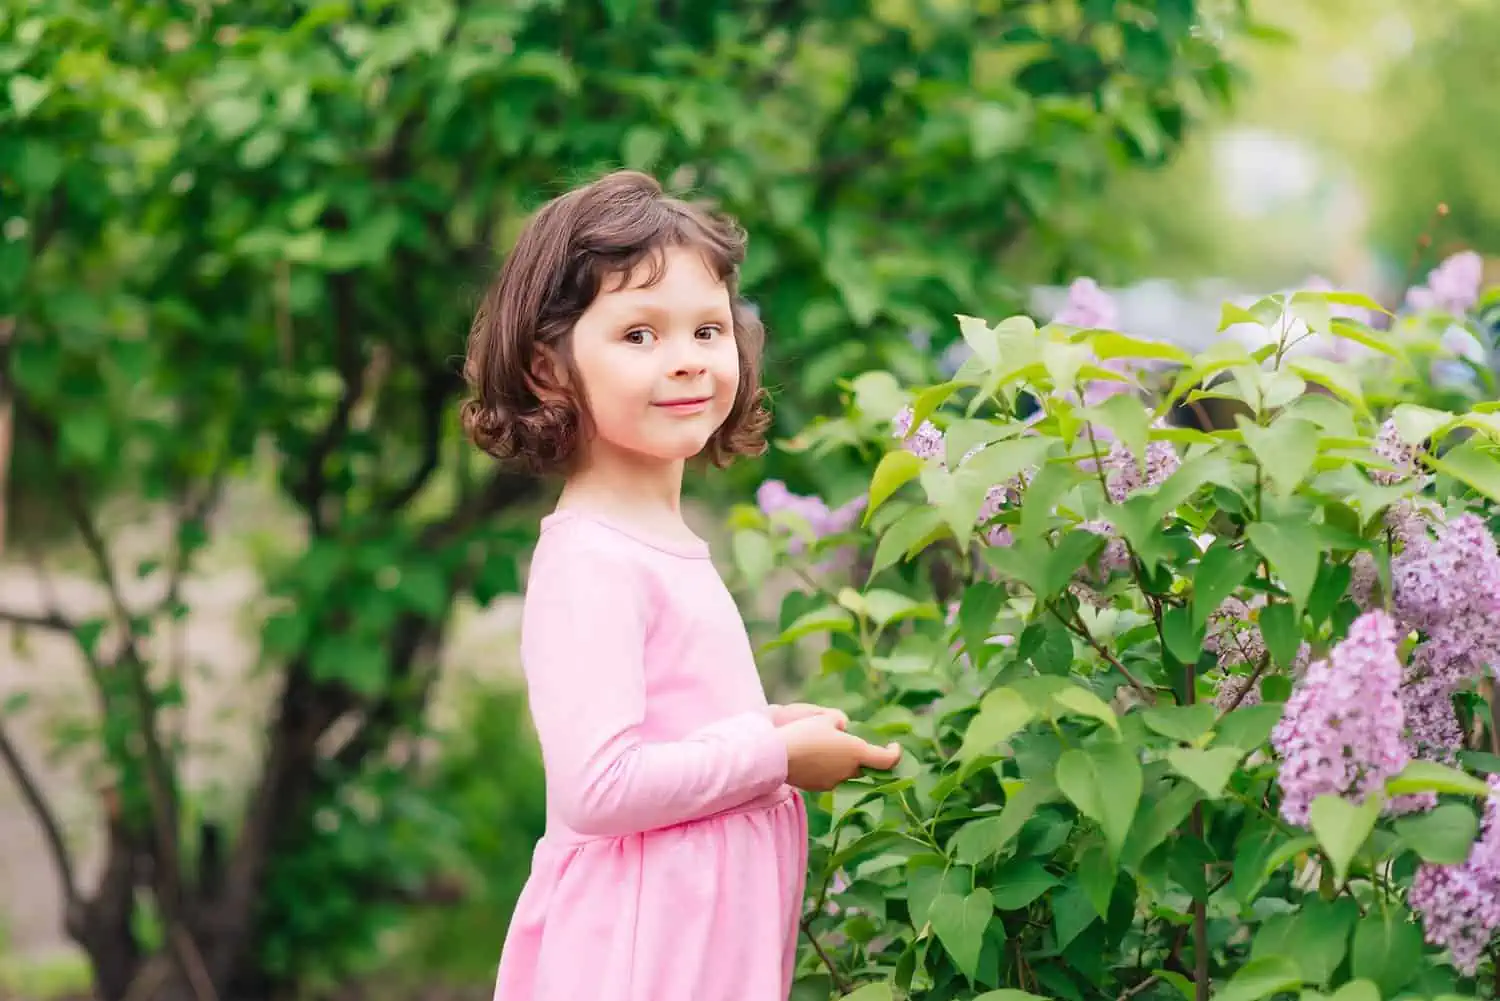 Adorable short haired girl in pink dress having fun in the garden looking at the camera